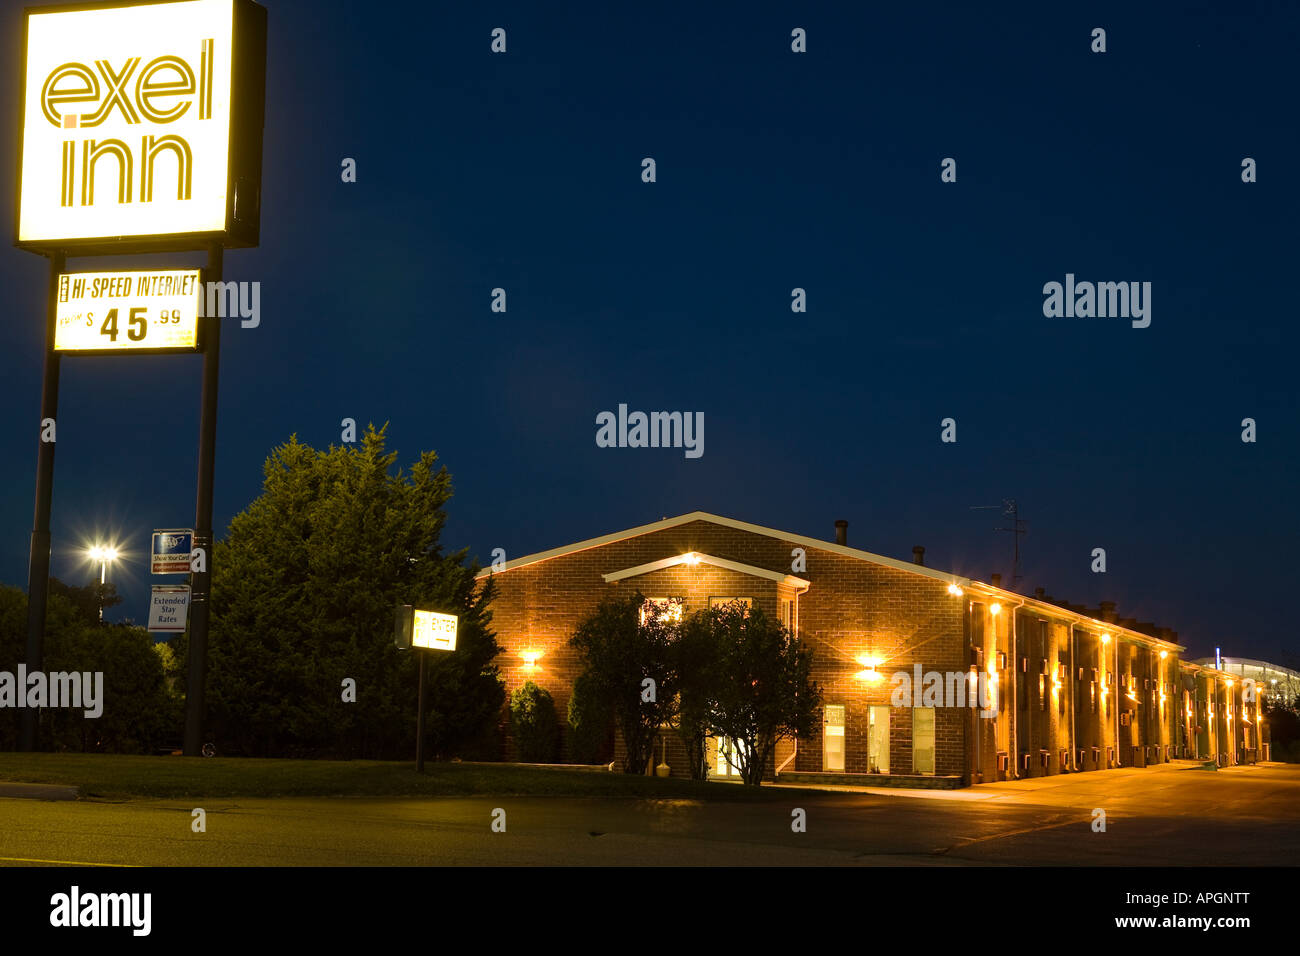 ILLINOIS Rockford Excel Inn motel building and sign at night lighted exterior Stock Photo